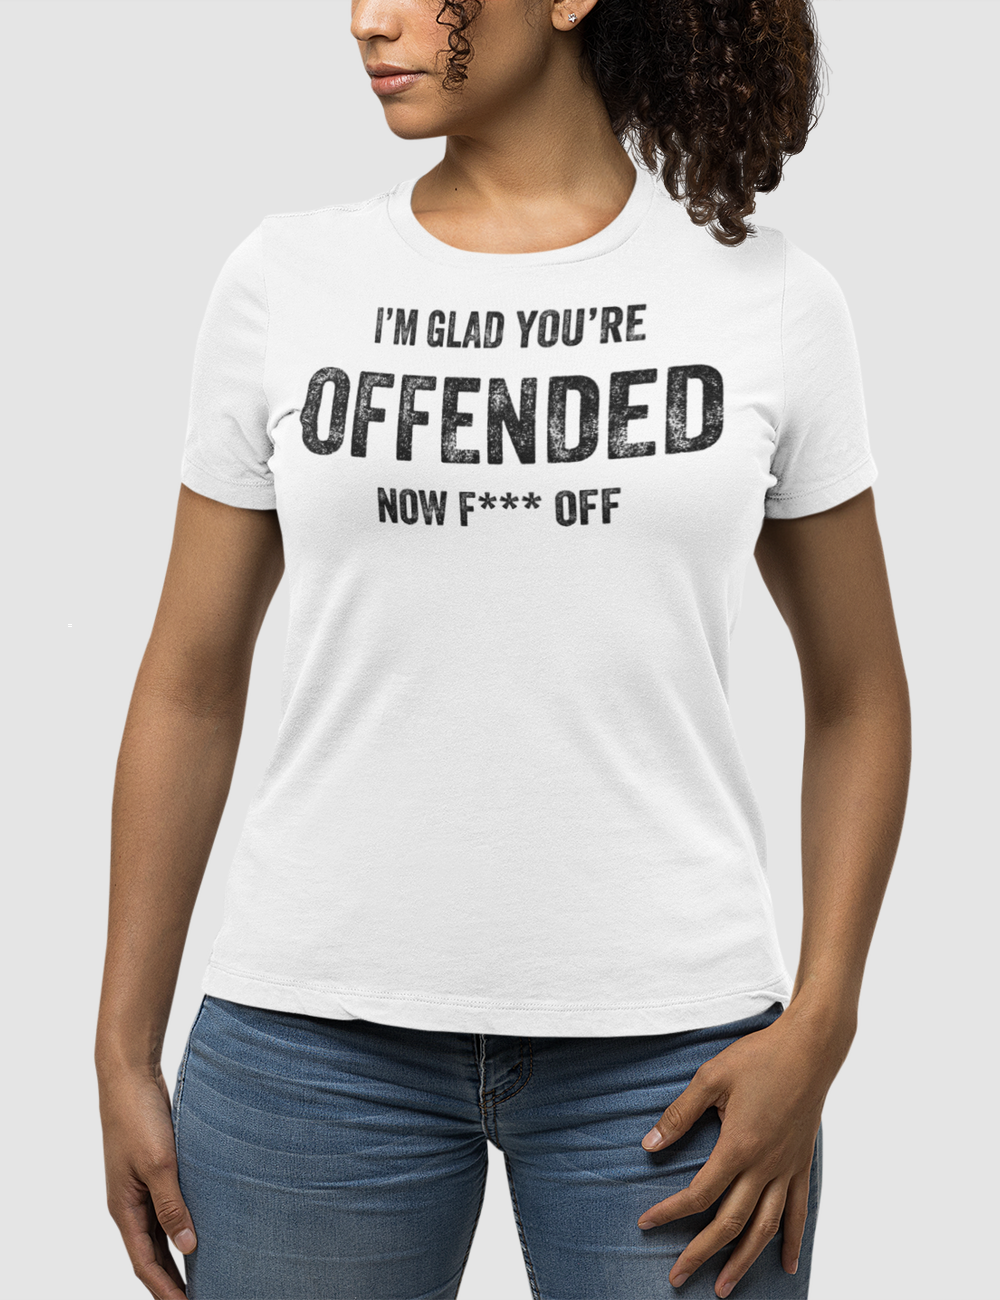 I'm Glad You're Offended | Women's Fitted T-Shirt OniTakai